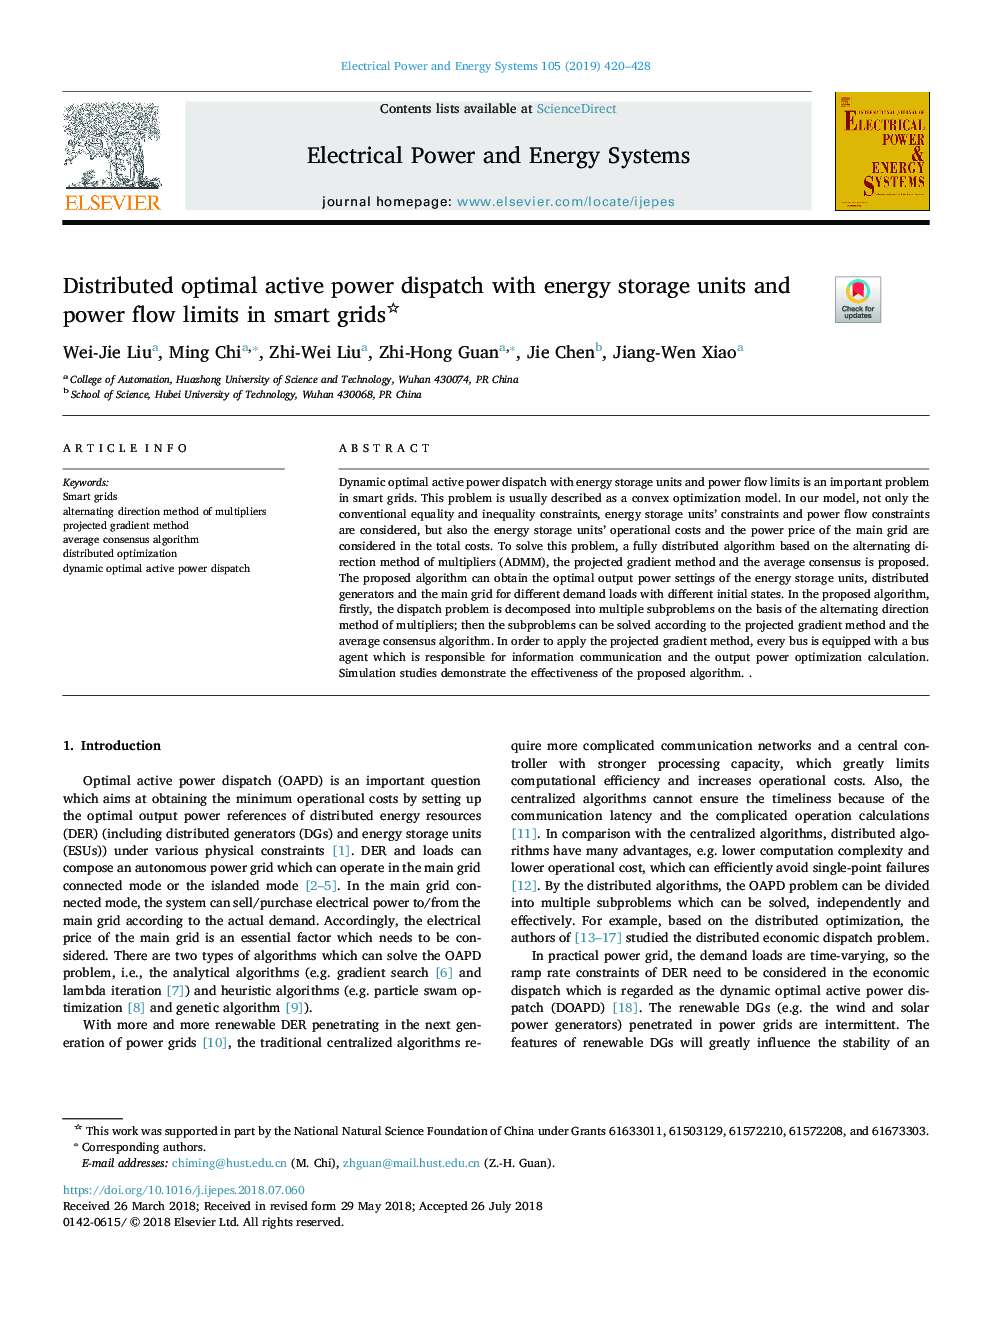 Distributed optimal active power dispatch with energy storage units and power flow limits in smart grids